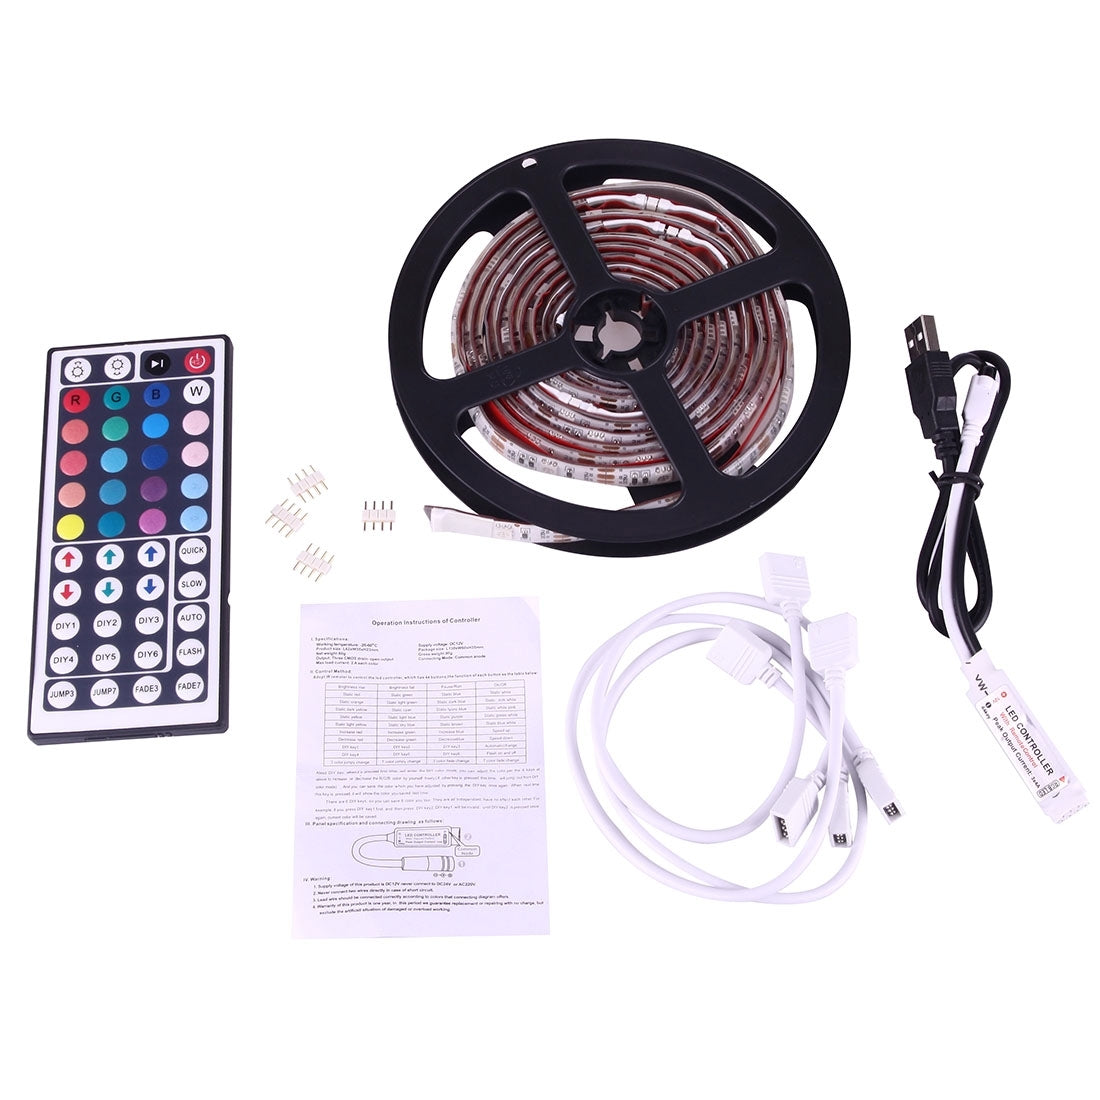 4 x 50cm USB TV Rope Light, 3W IP65 Waterproof 30 LEDs SMD 5050 With 44-keys Remote Controller